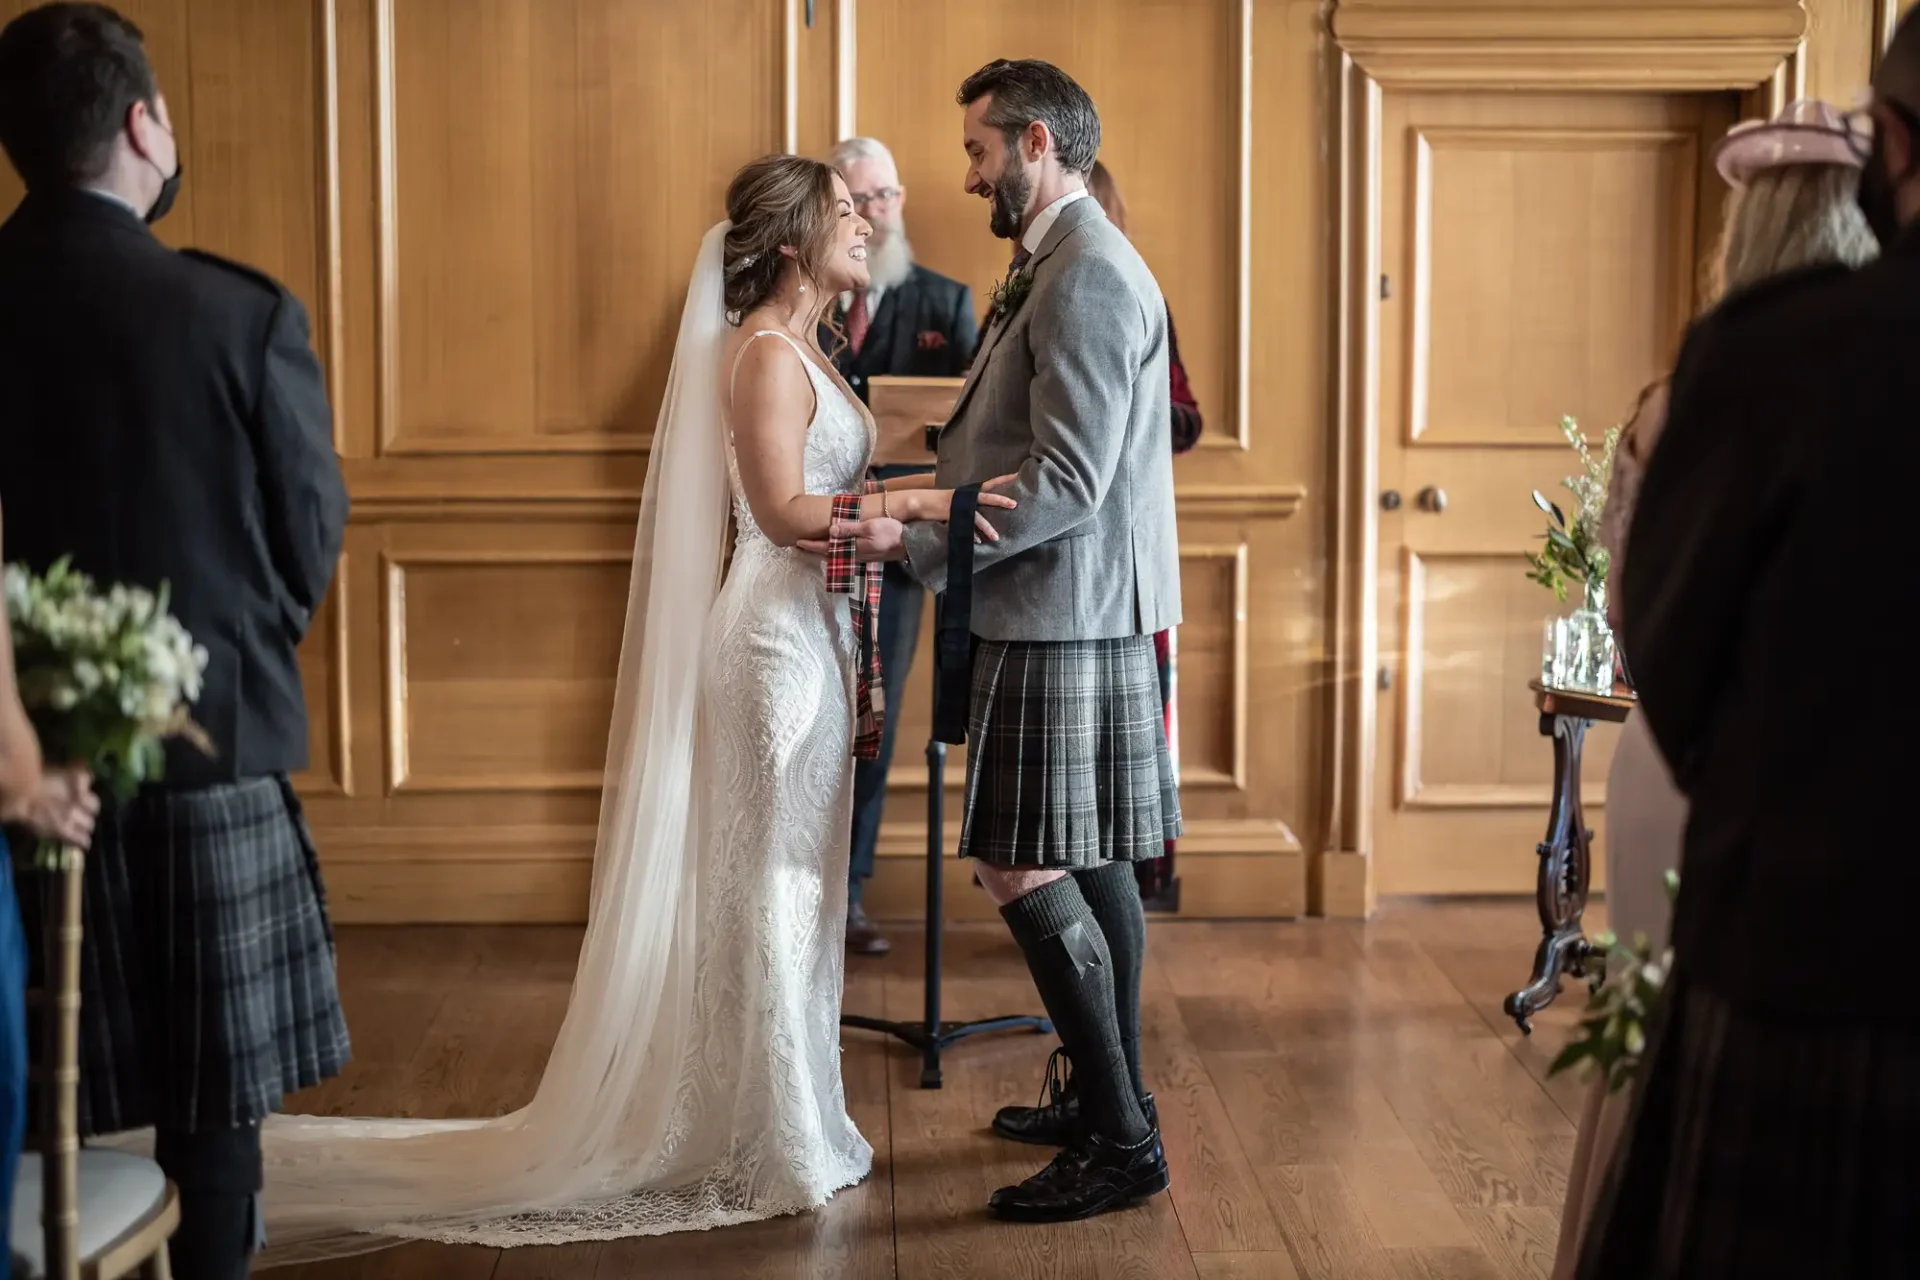 A bride and groom exchange vows, the groom wearing a kilt; guests are visible in an elegantly paneled room.